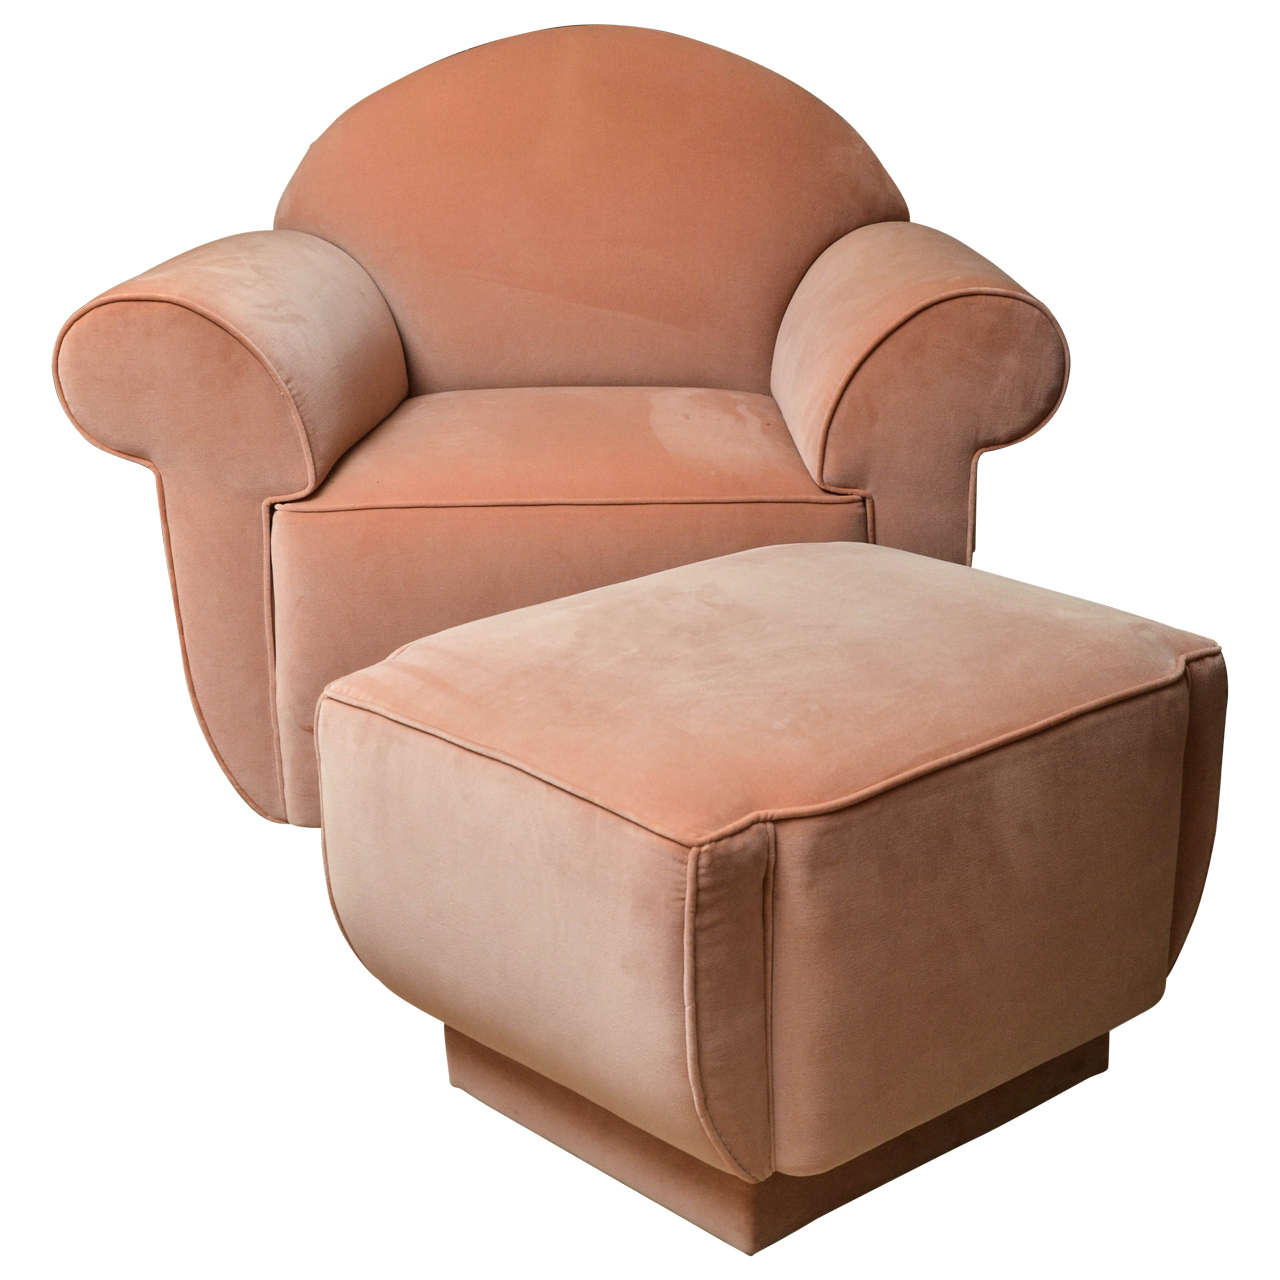 Deco Style Club Chair and Ottoman Upholstered in Apricot Velveteen